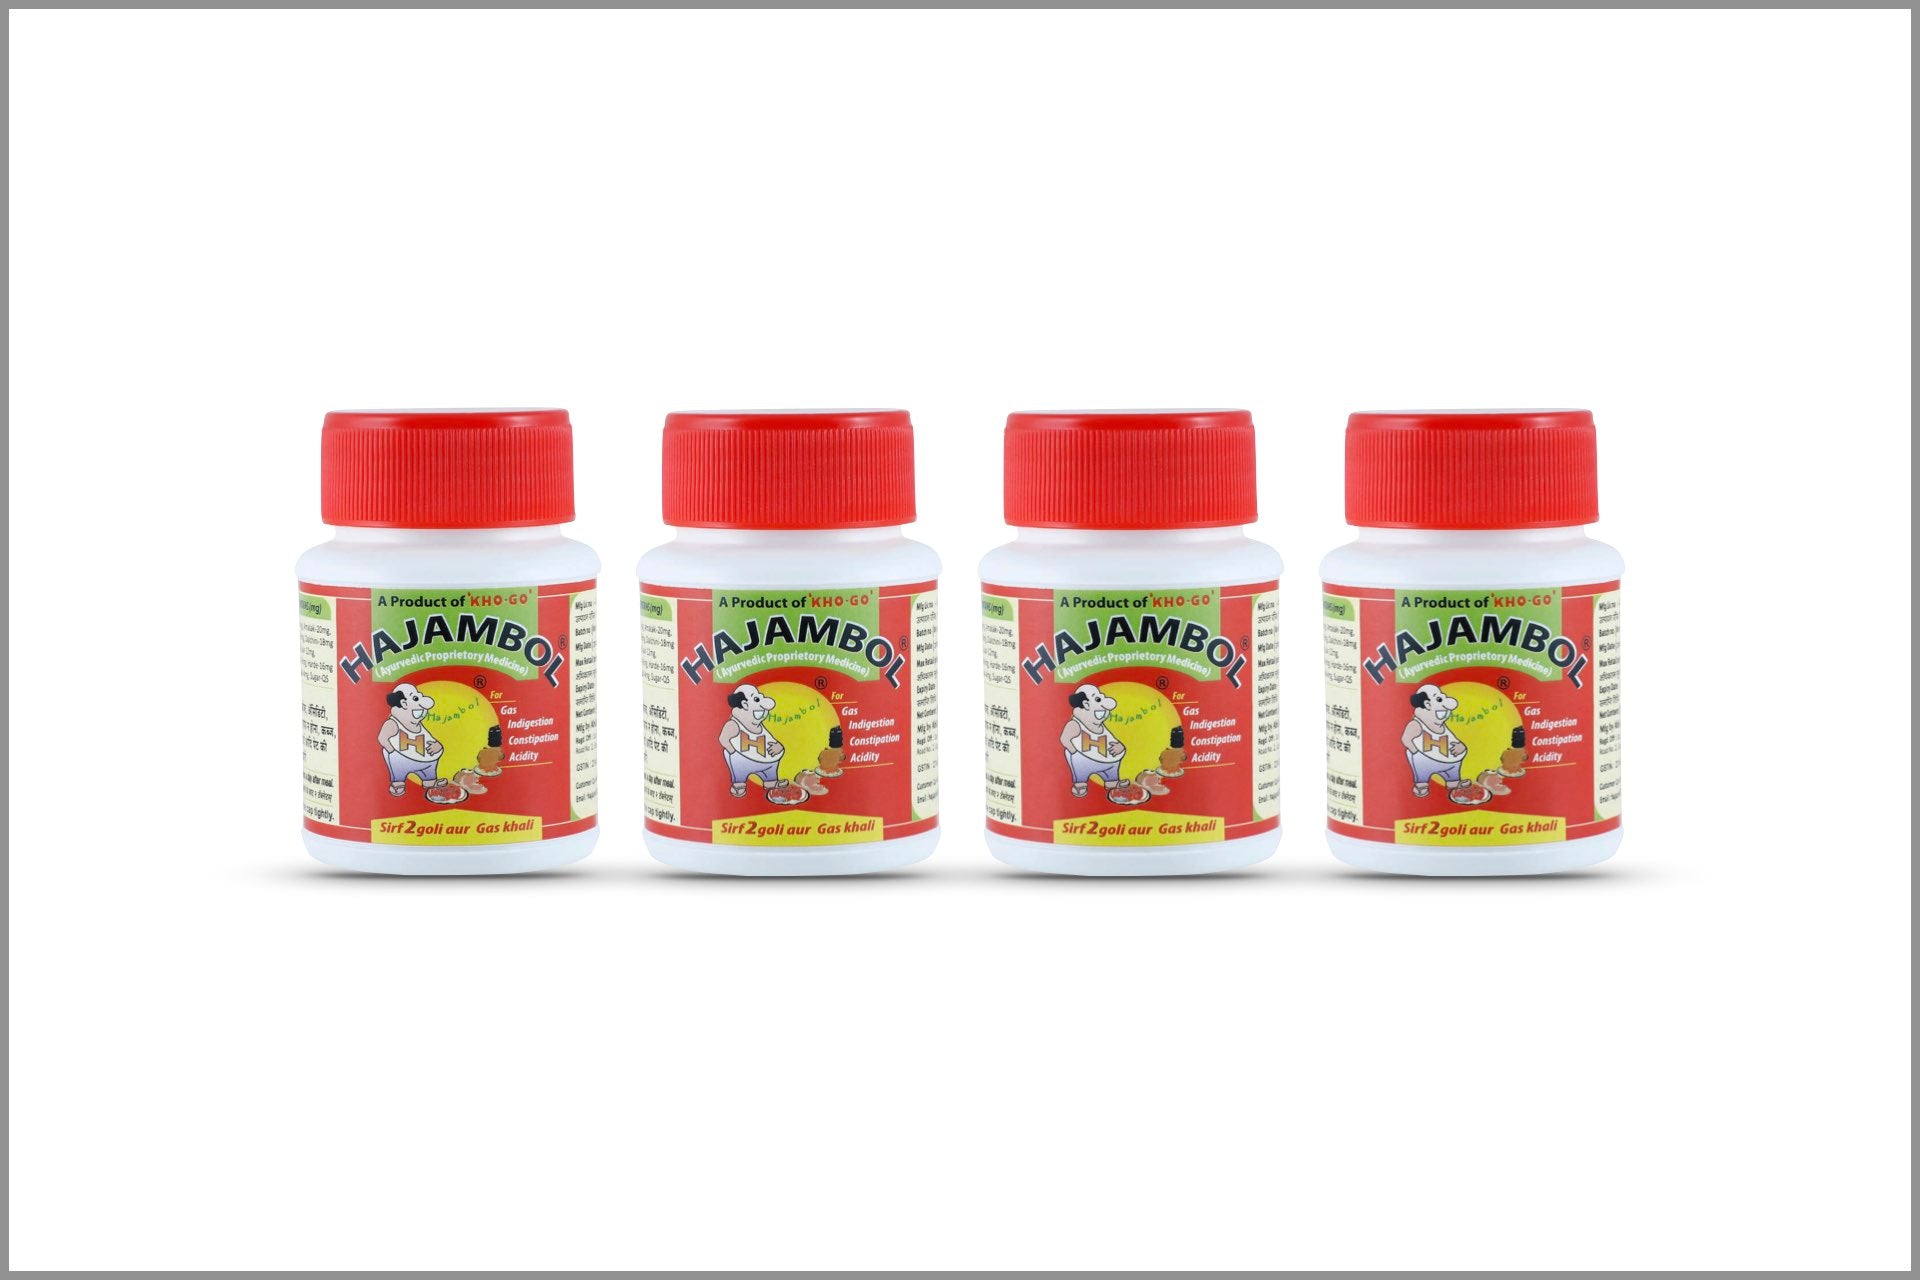 Hajambol Gas Tablets - Pack of 4 x 50 tablets